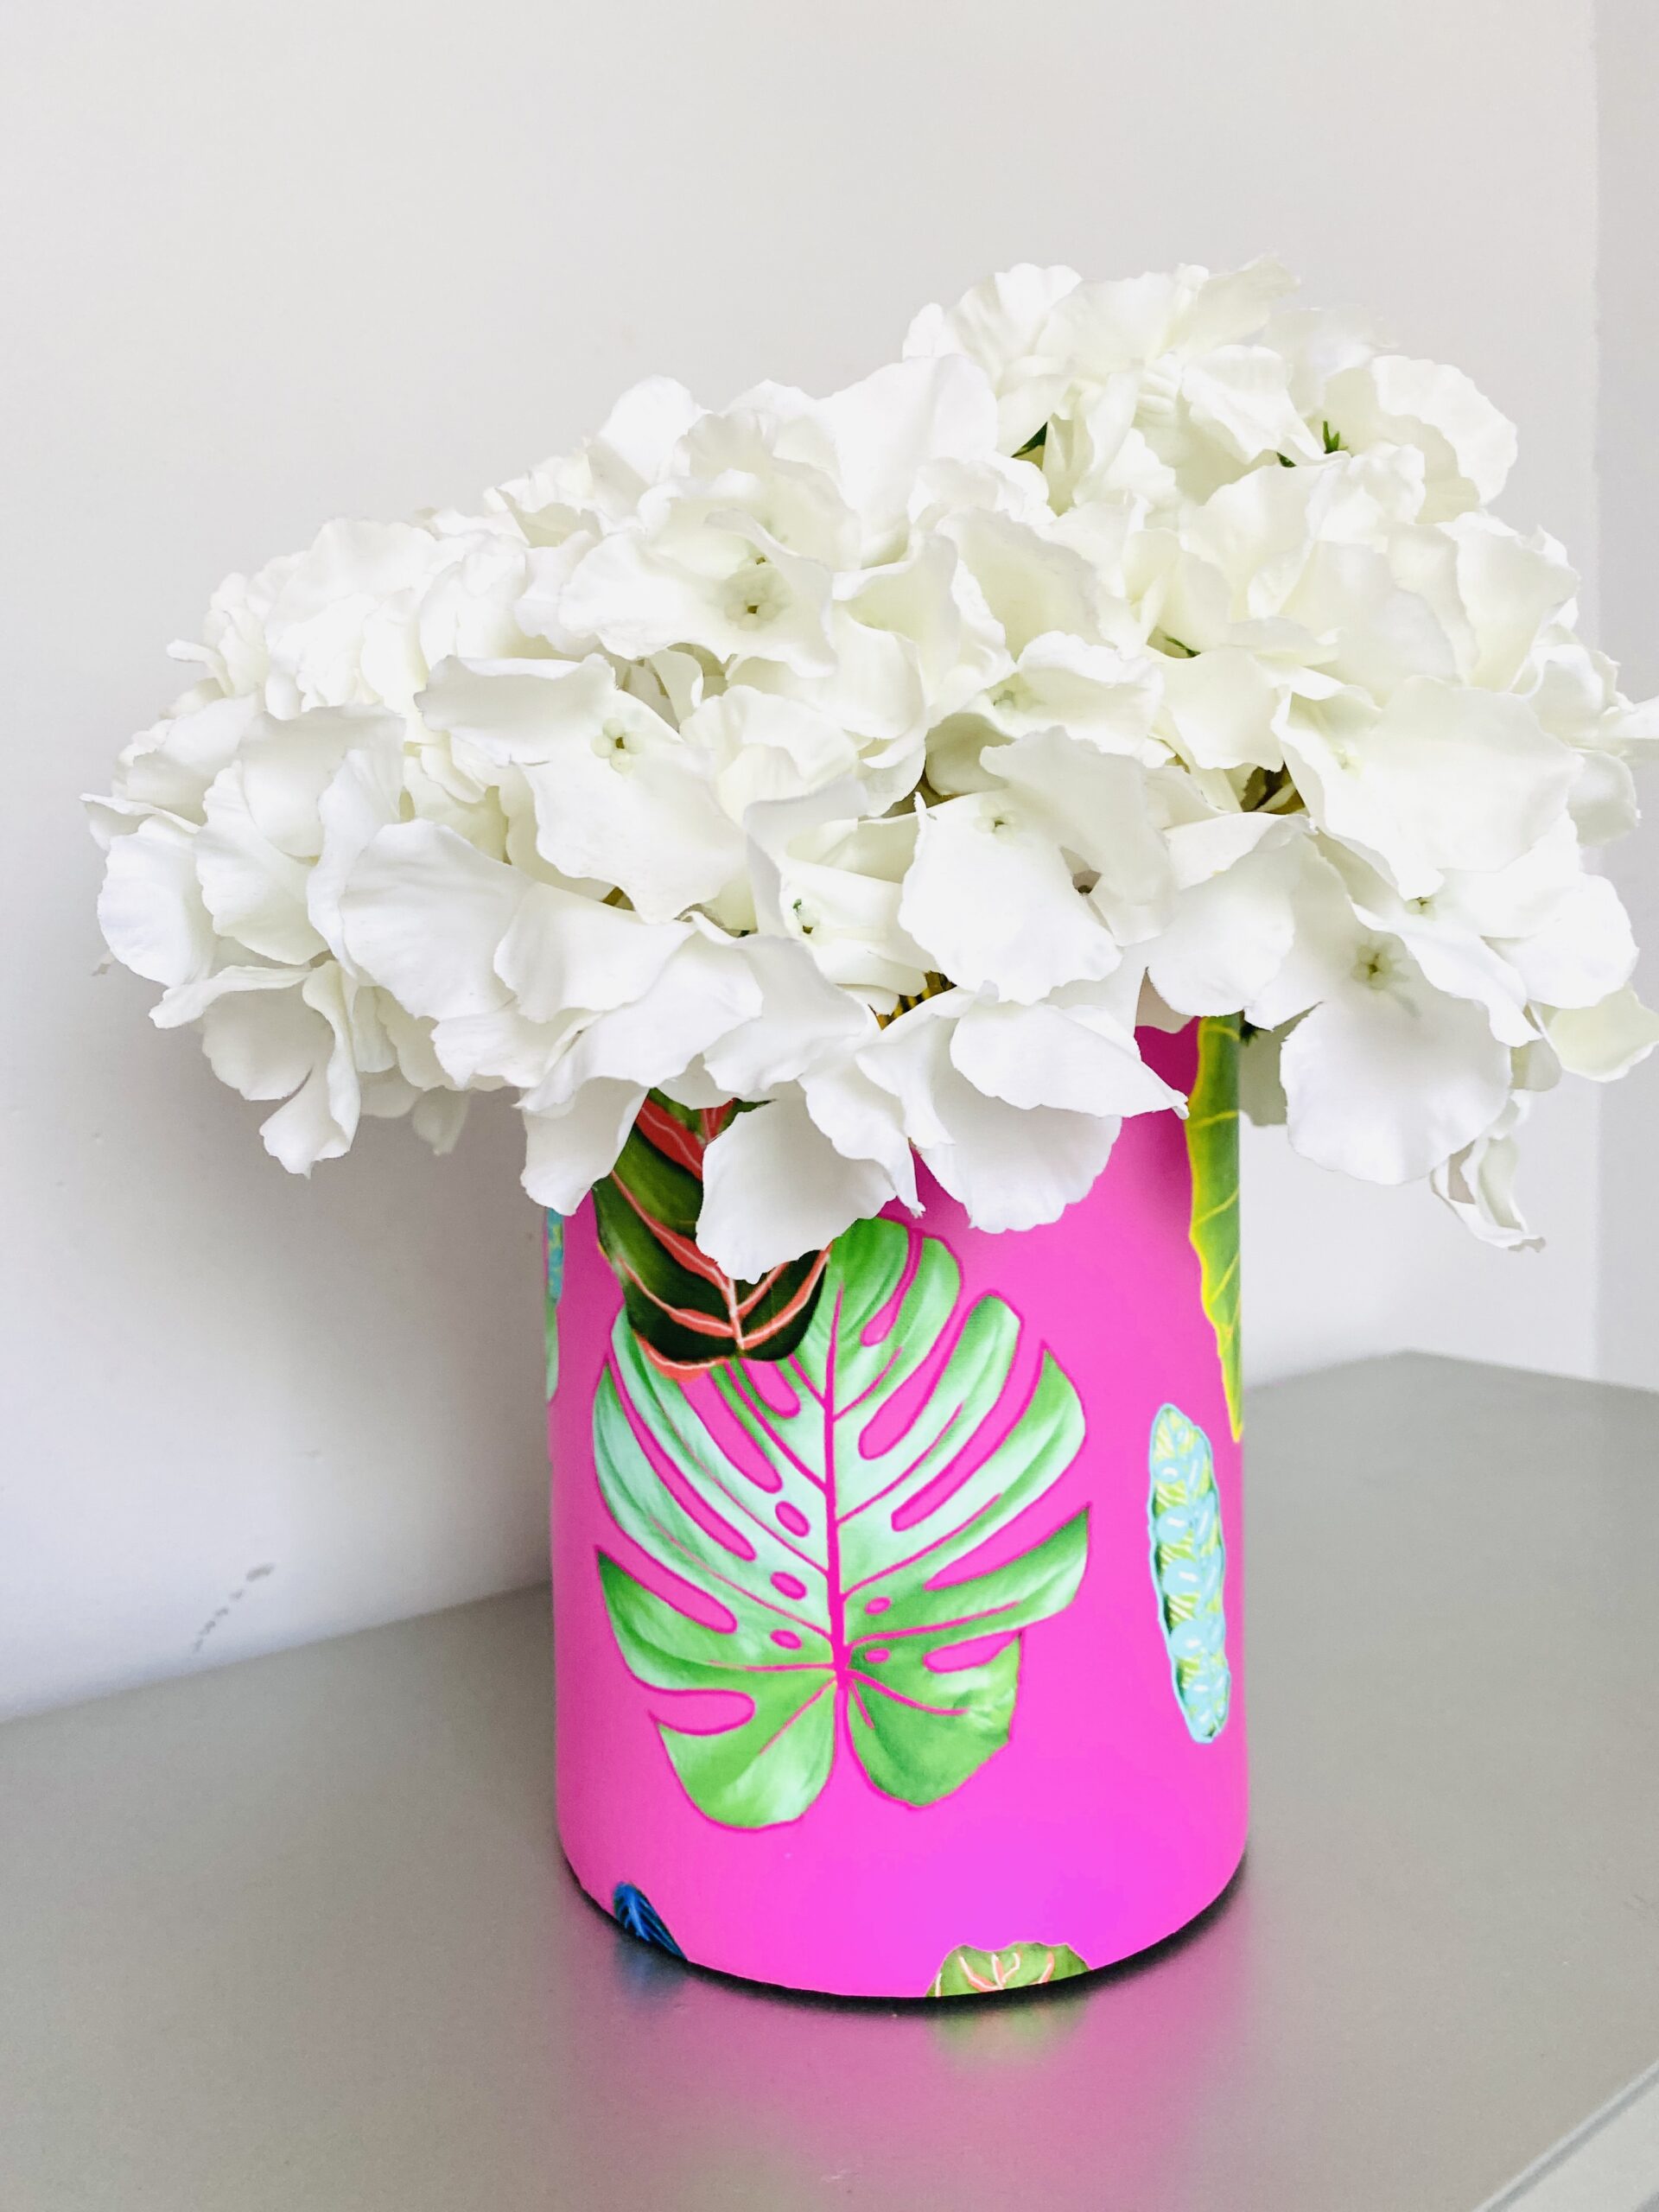 White flowers spill out of the top of a vase covered in peel and stick wallpaper. The design on the wallpaper features plant leaves in different sizes and shapes on a hot pink background. The vase sits on a silver surface and there is a wall white behind them.  